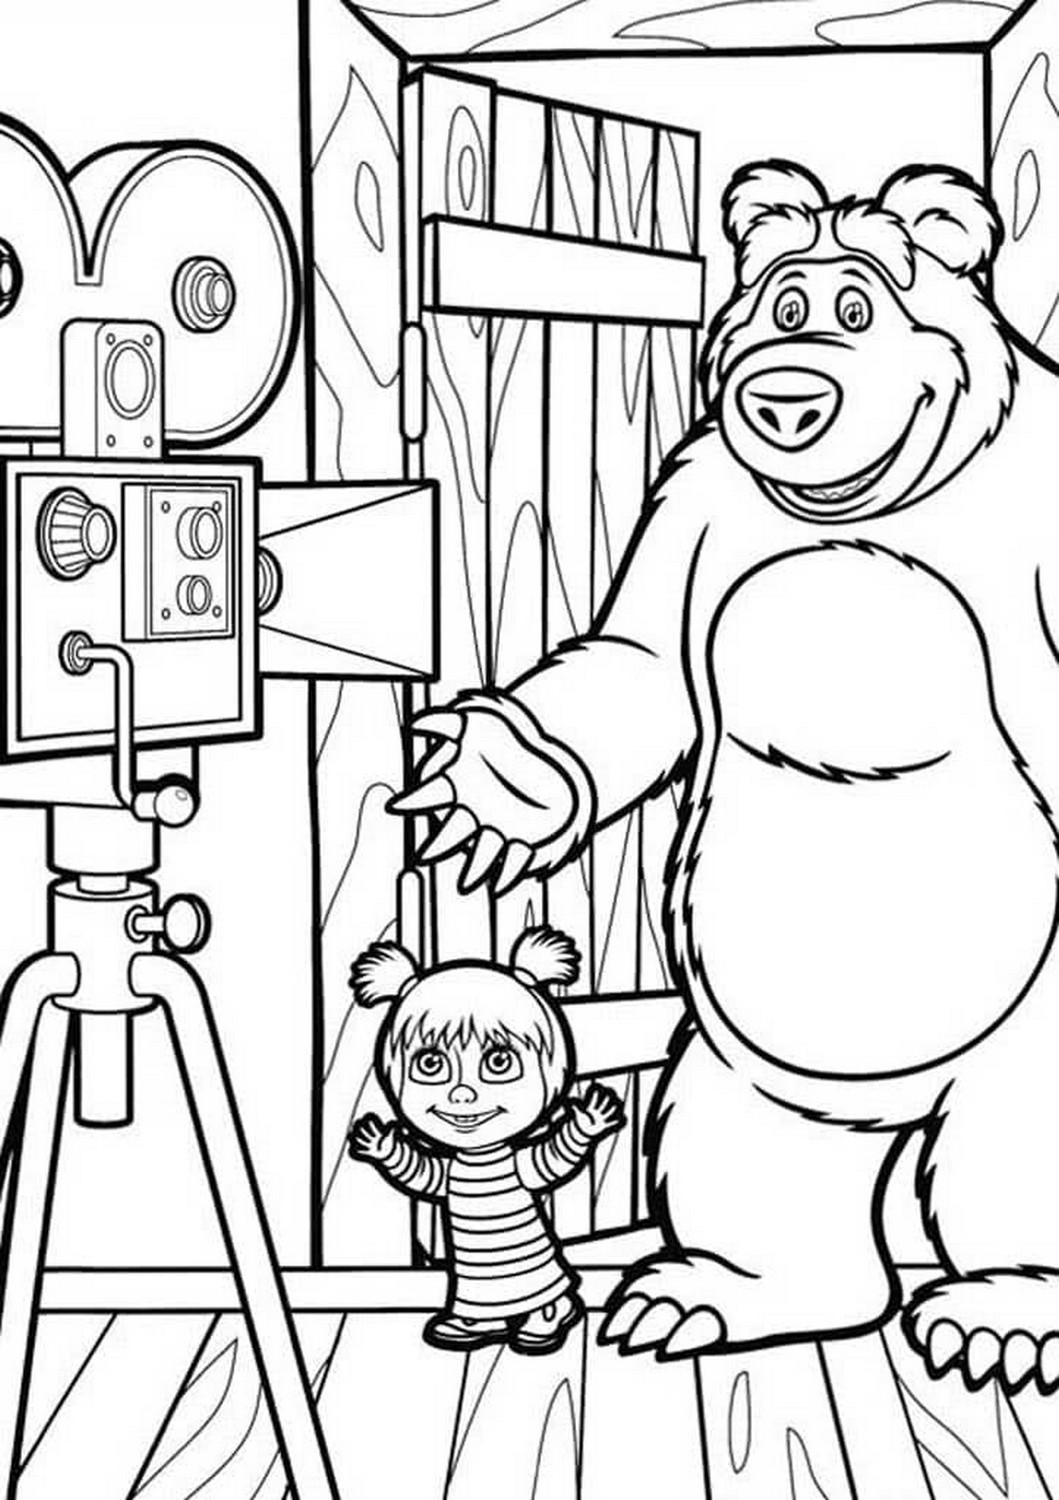 Masha and the Bear 95 drawing from Masha and the Bear to print and color